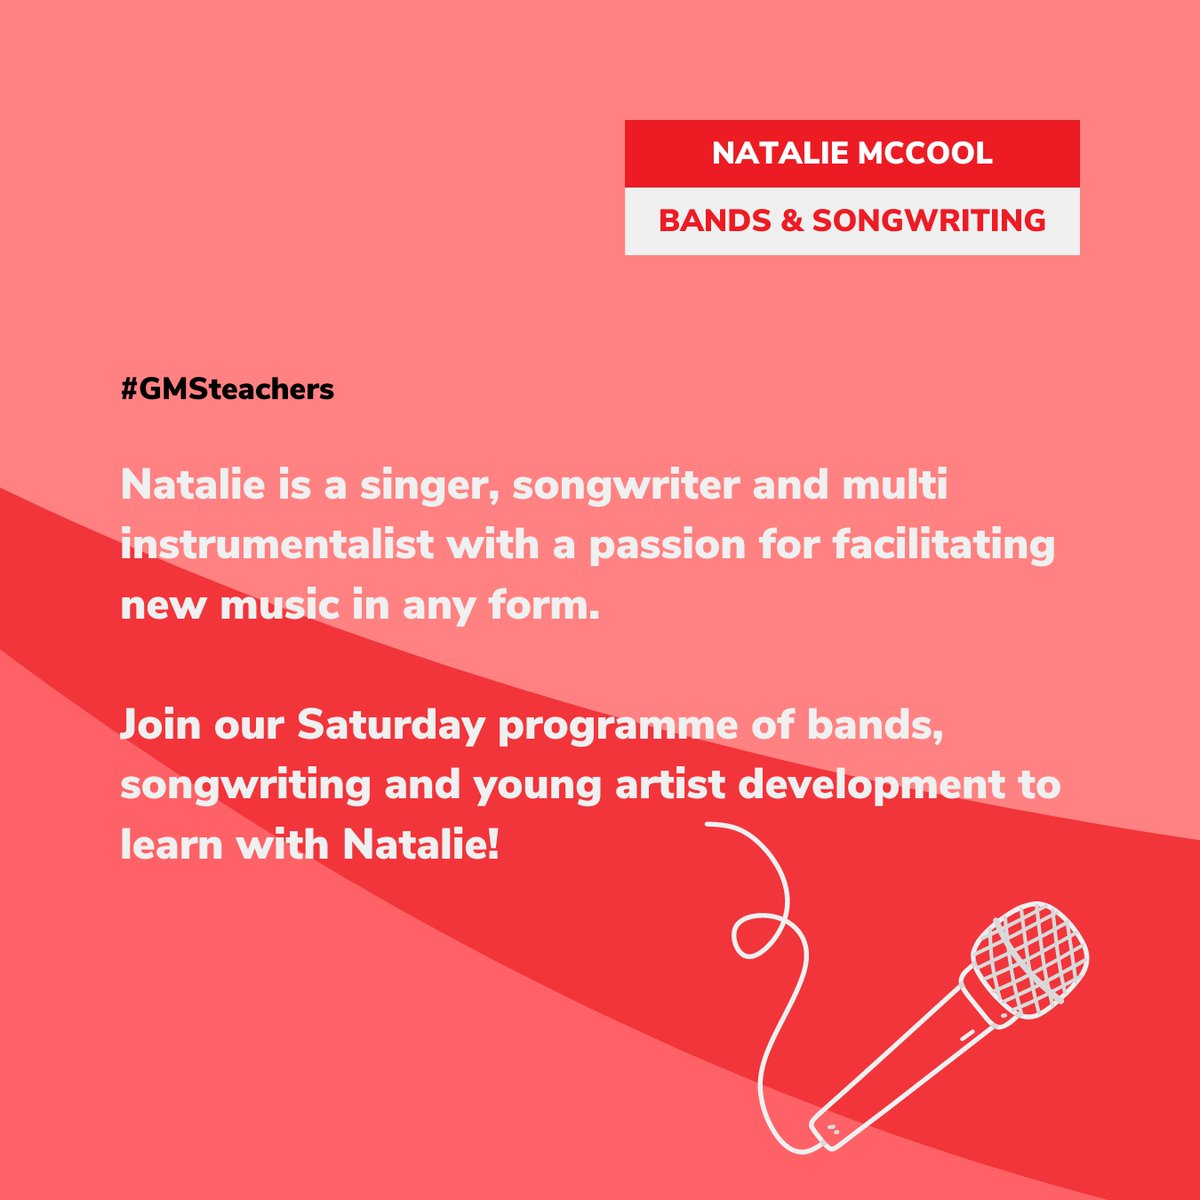 GMS teacher Natalie McCool is a singer, songwriter and multi instrumentalist with a passion for facilitating new music in any form. Natalie teaches on our Saturday programme at Thomas Tallis school, with bands, songwriting and young artist development.